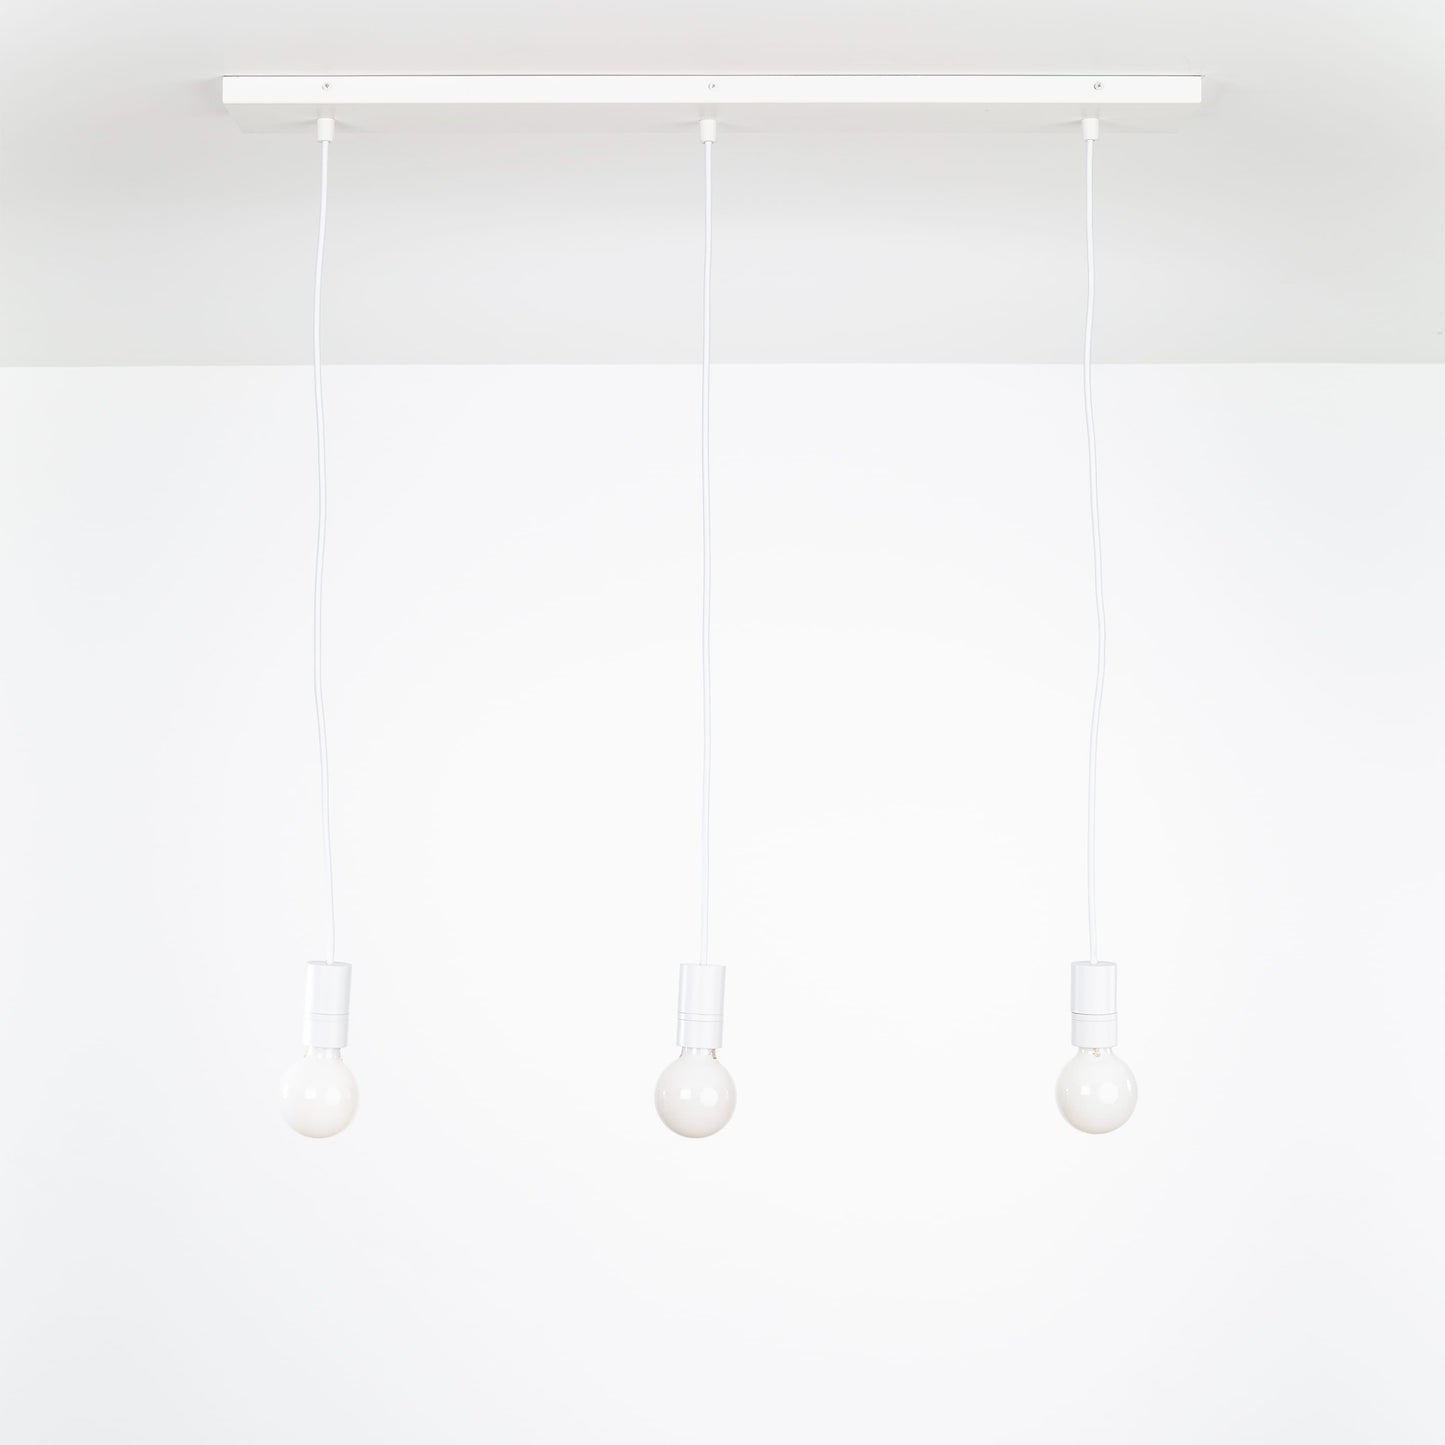 AiO (All-in-One) 3-Line Chandelier